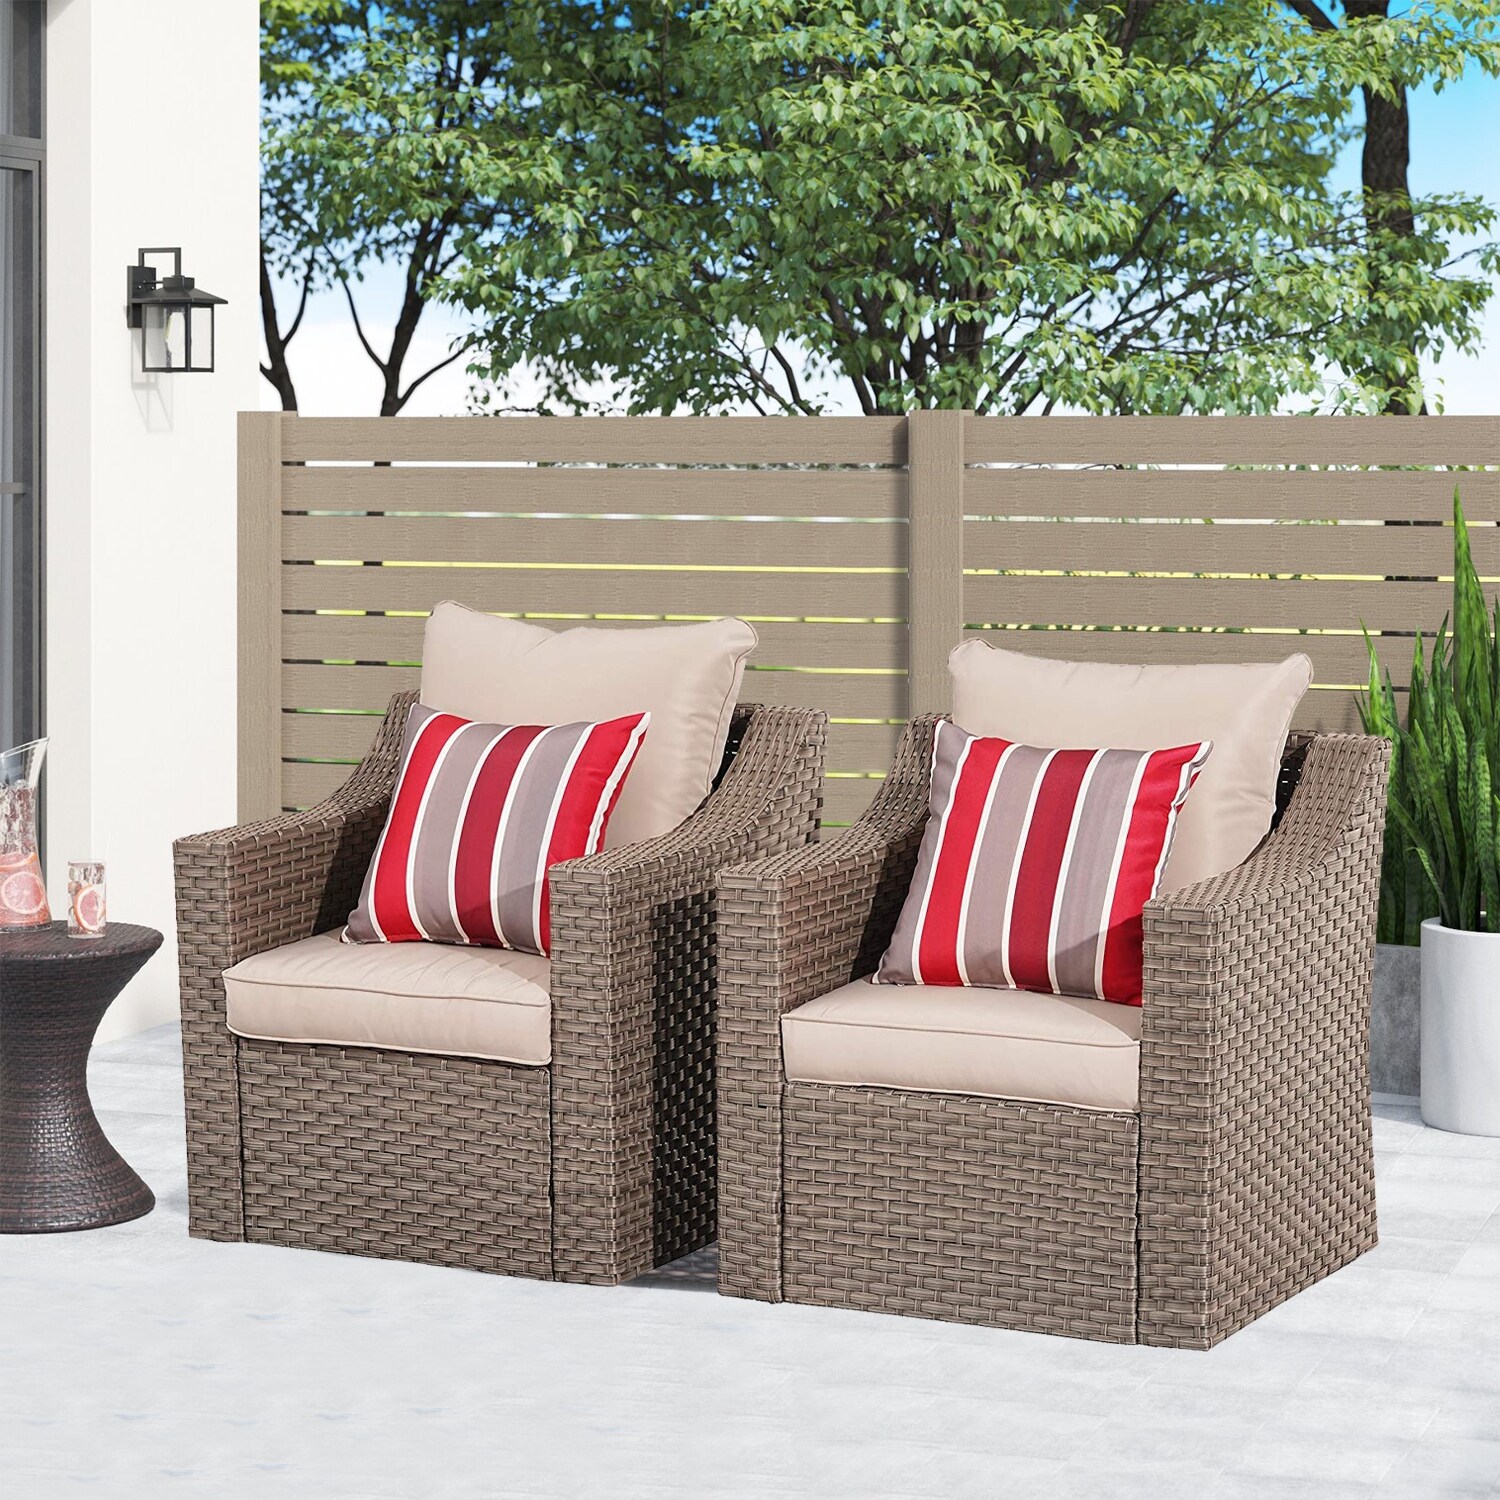 Wicker Outdoor Furniture With Two Single Chair